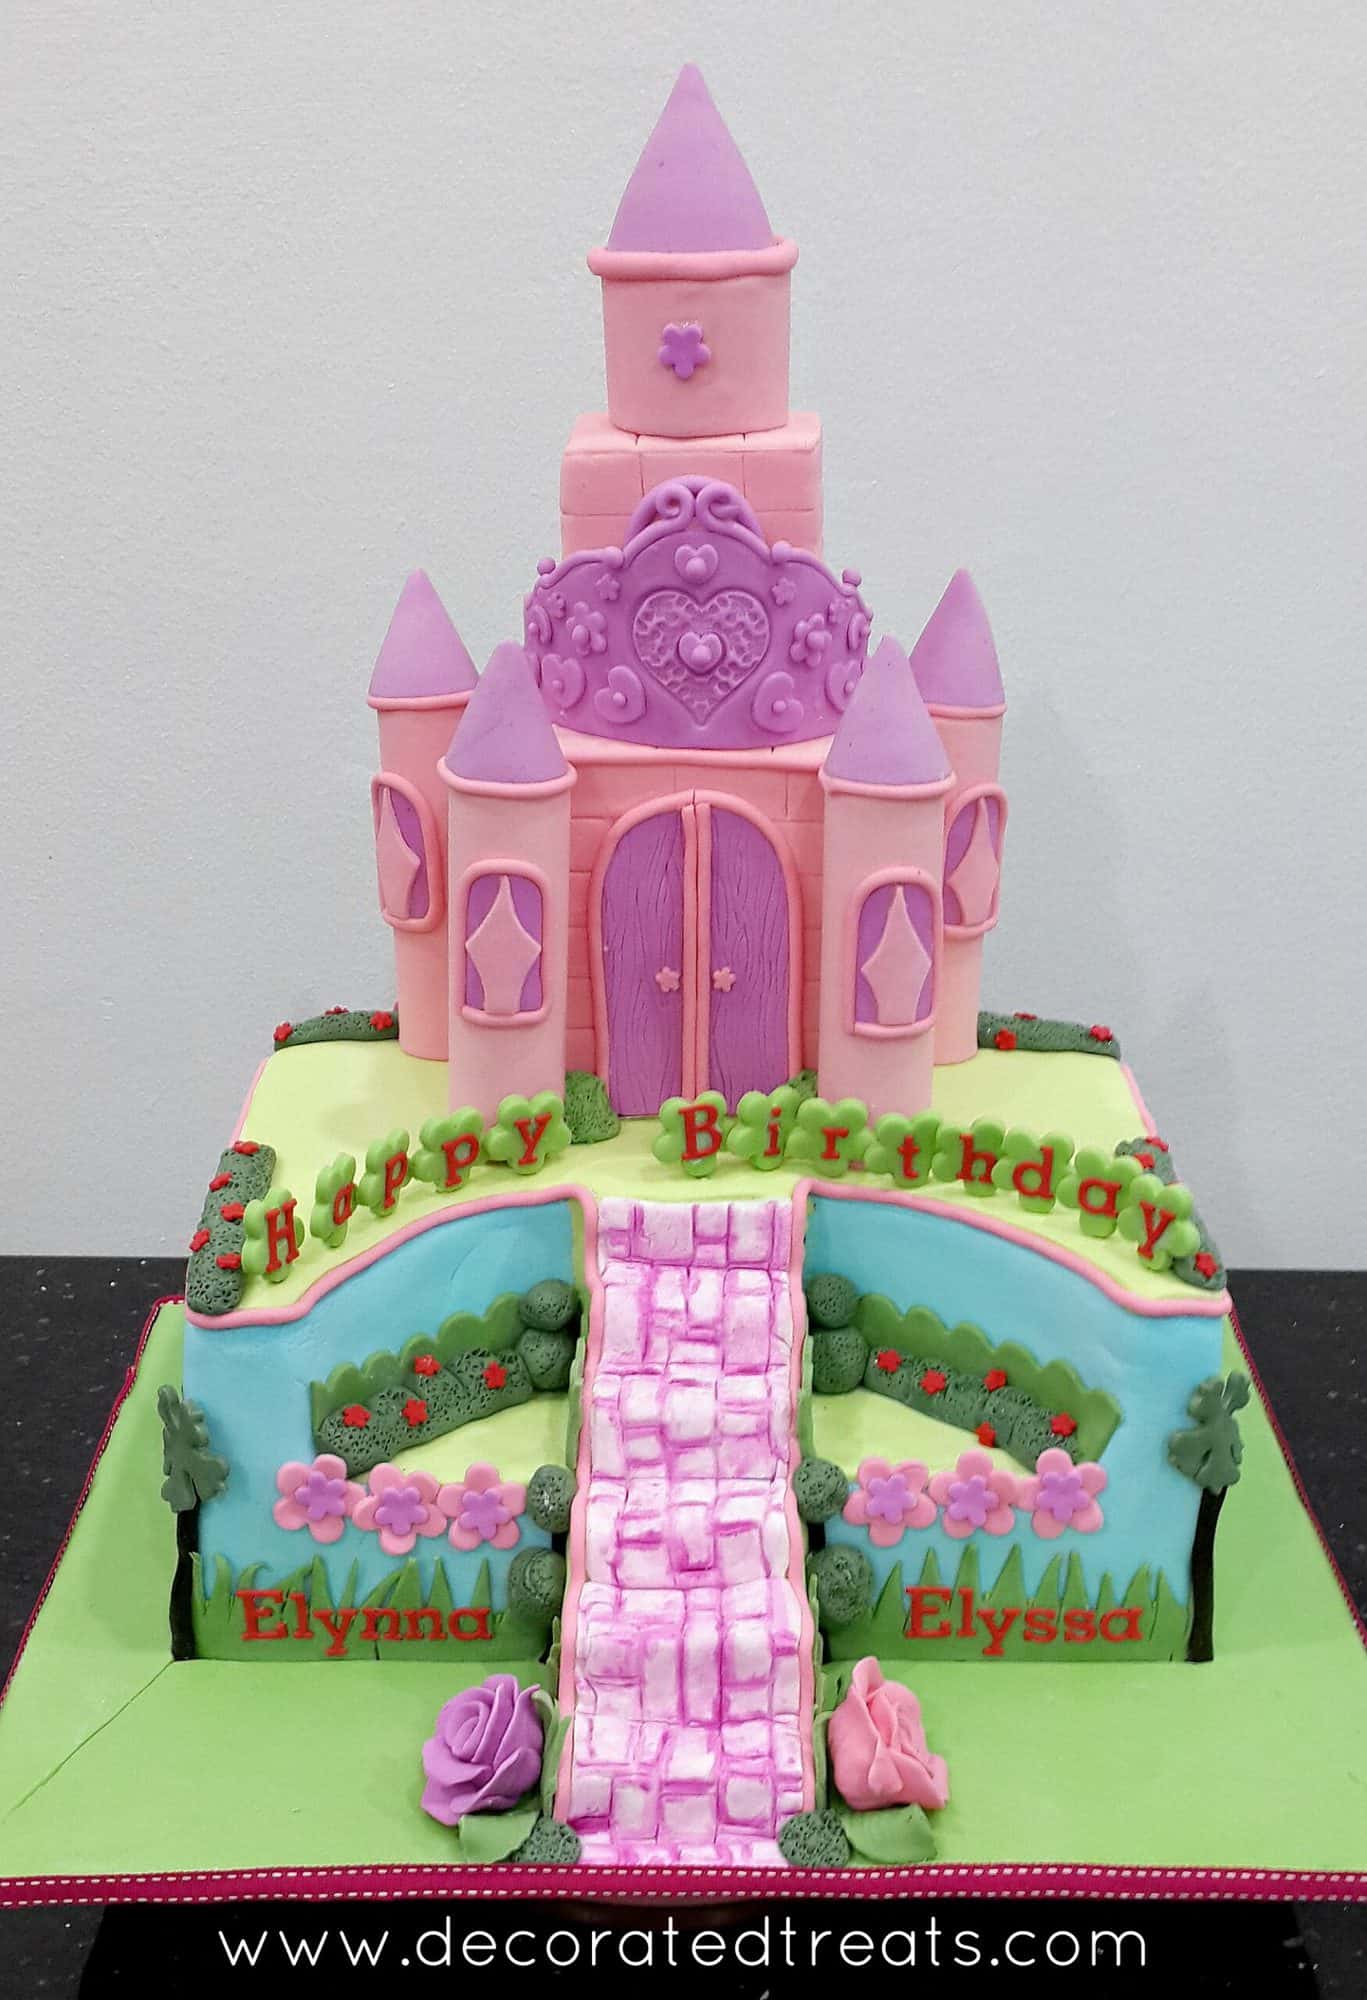 A rectangle cake with a pink castle cake topper